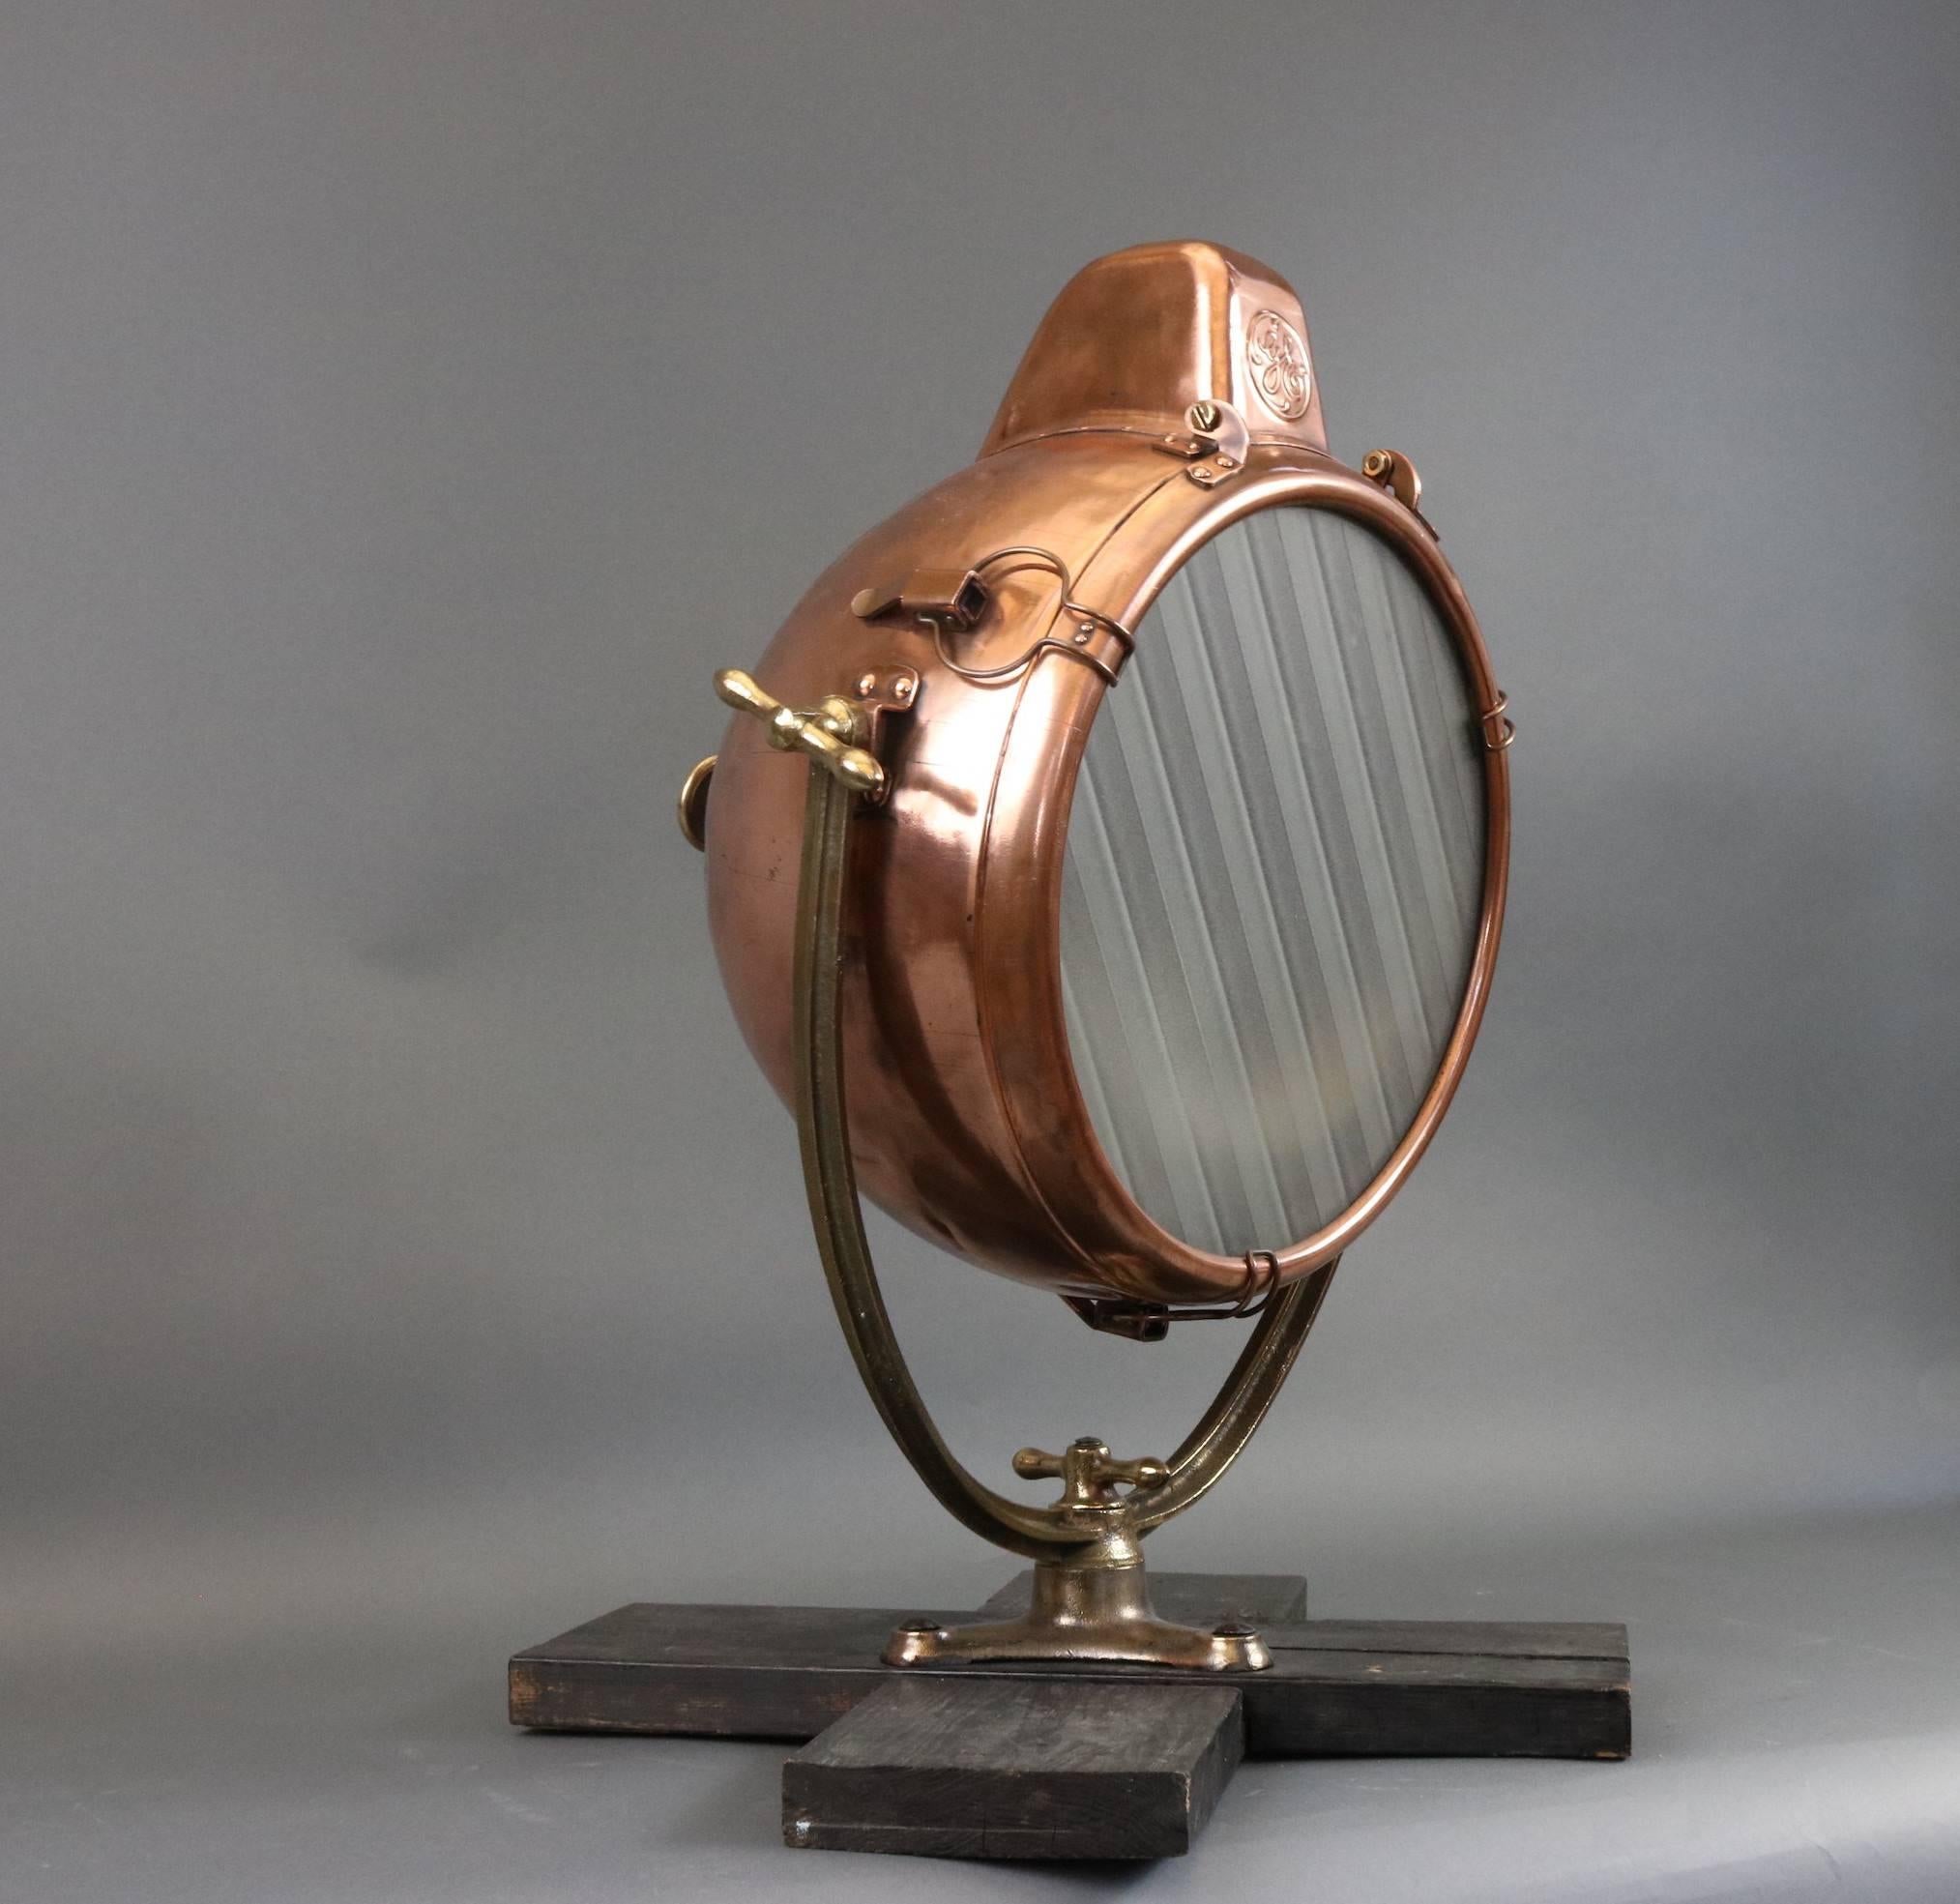 Polished copper beacon with frosted glass lens. Mounted on an iron yoke with wood base. Measures: 24" long x 20" wide x 31" tall.